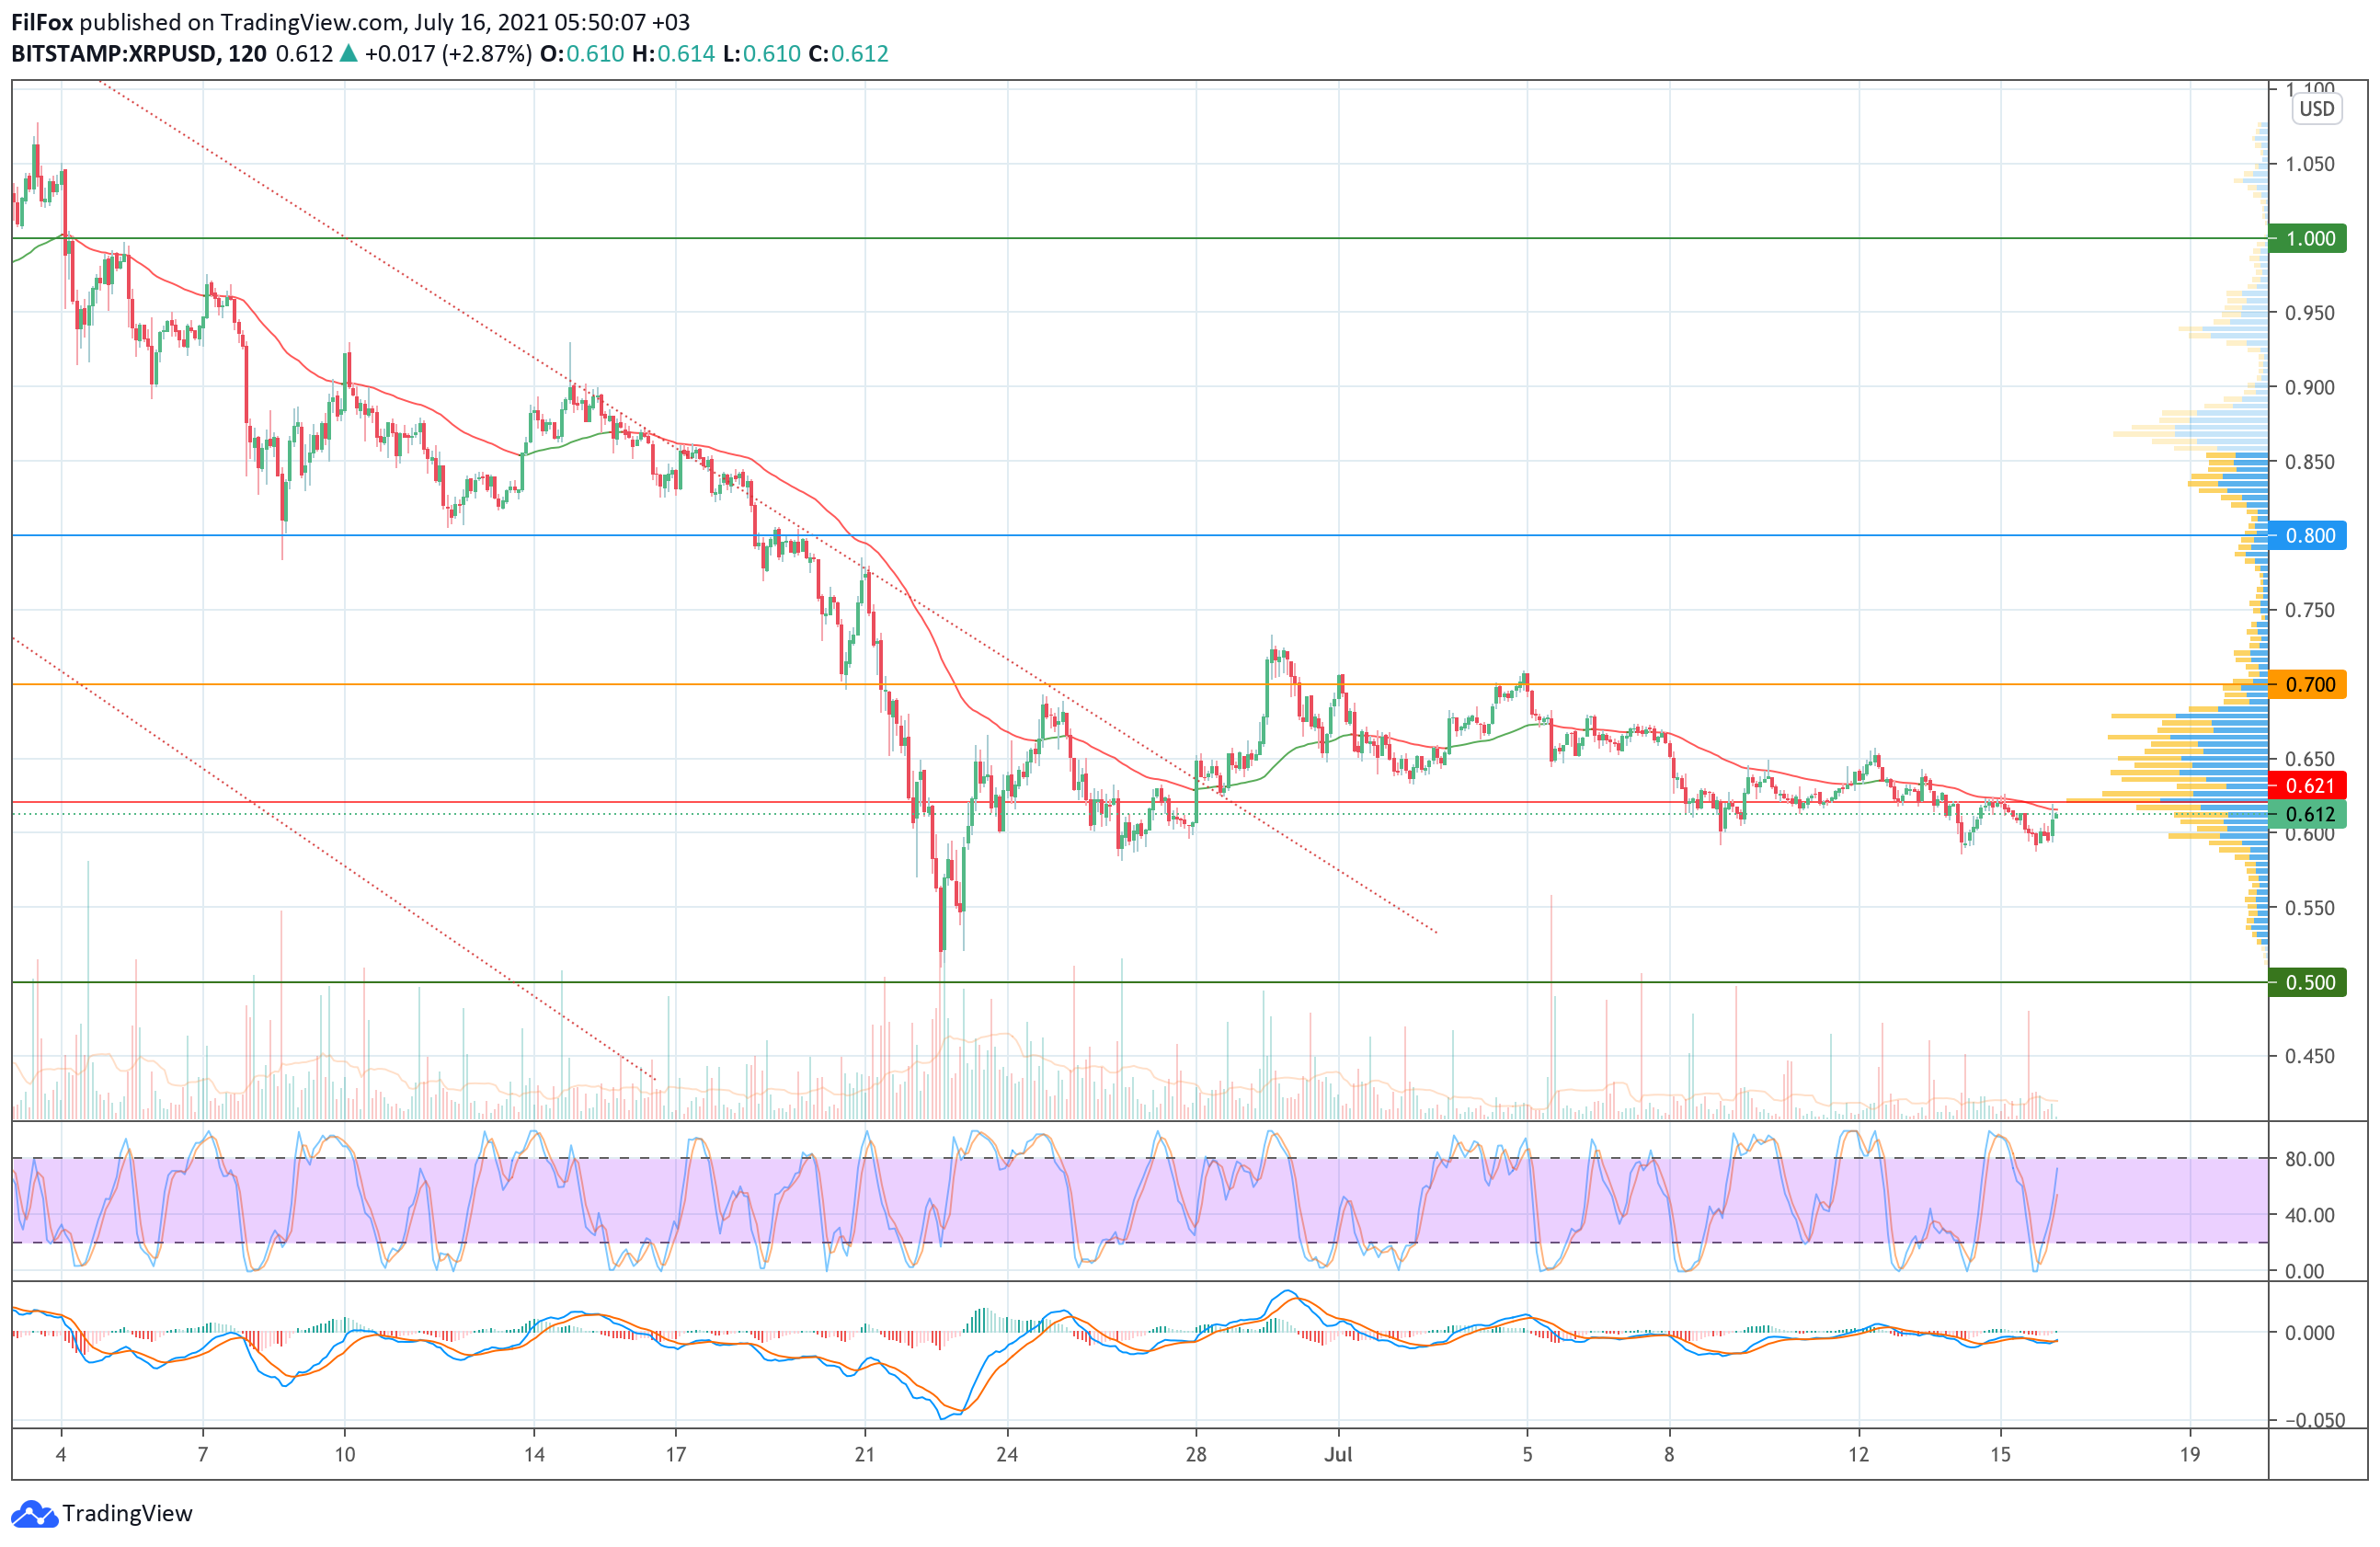 Analysis of the prices of Bitcoin, Ethereum, XRP for 07/16/2021